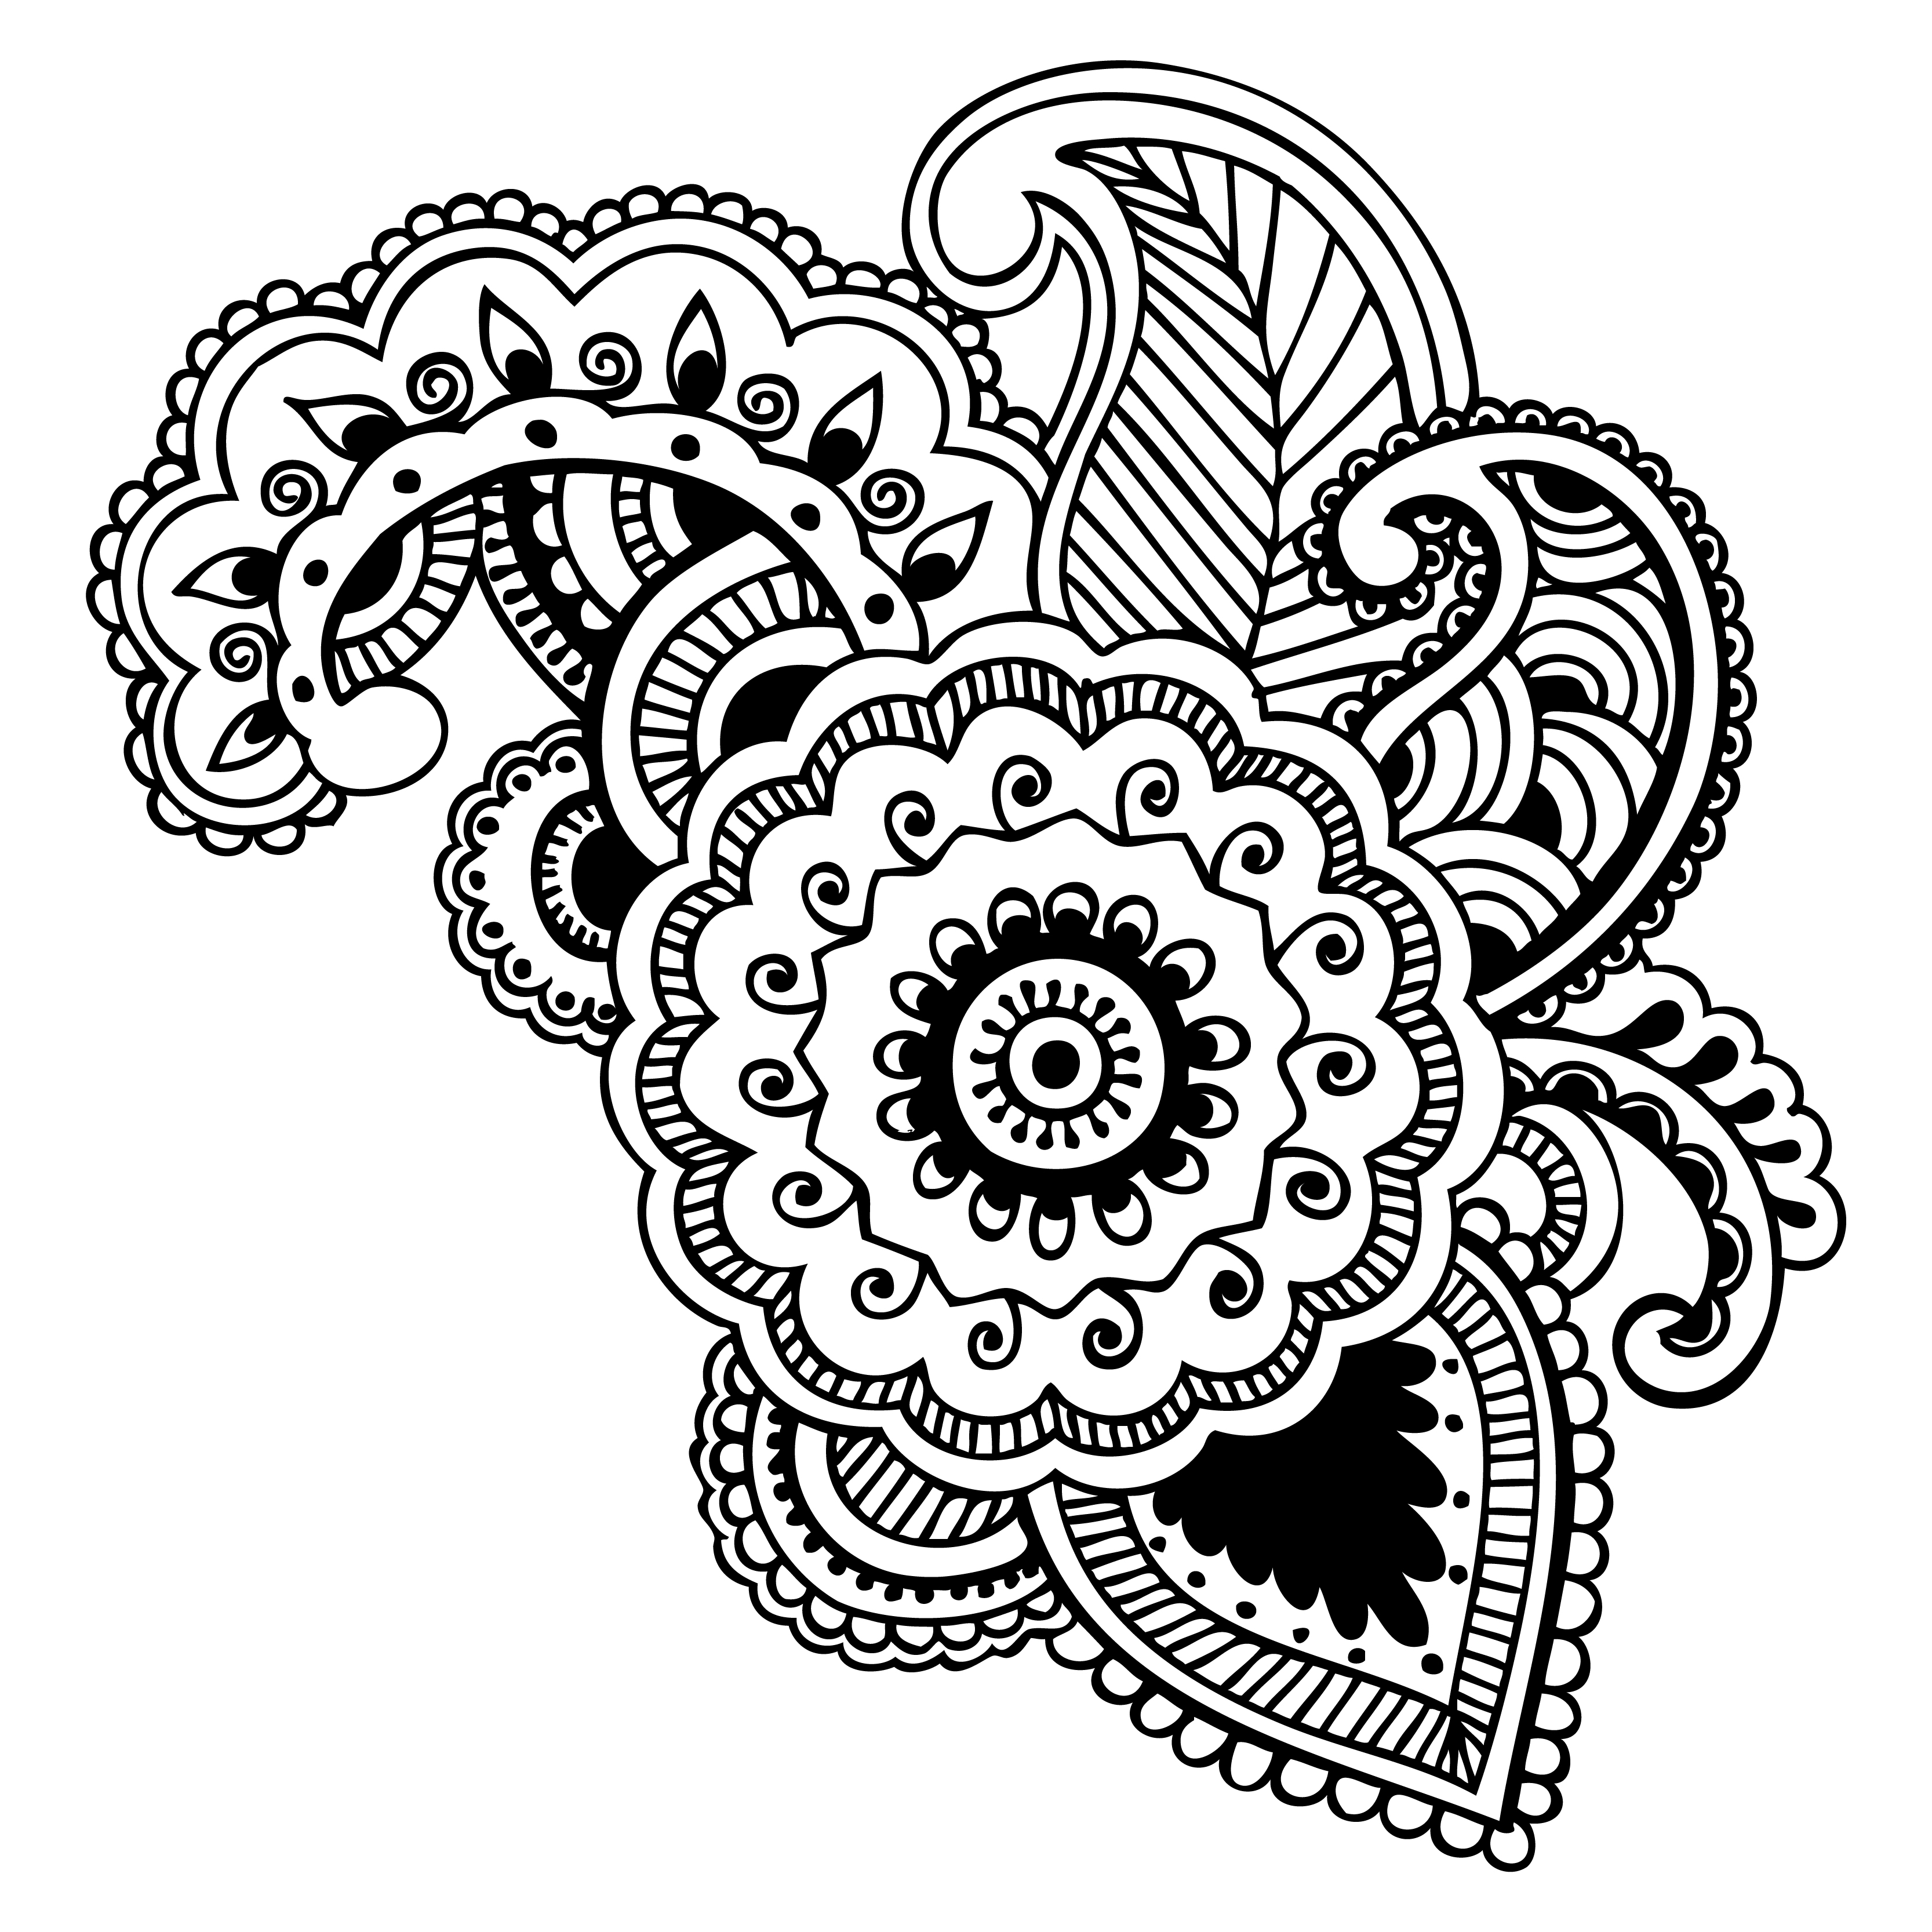 Explore the Intricate Artistry Of 40+ Hand Drawn Paisley Vector Designs ...